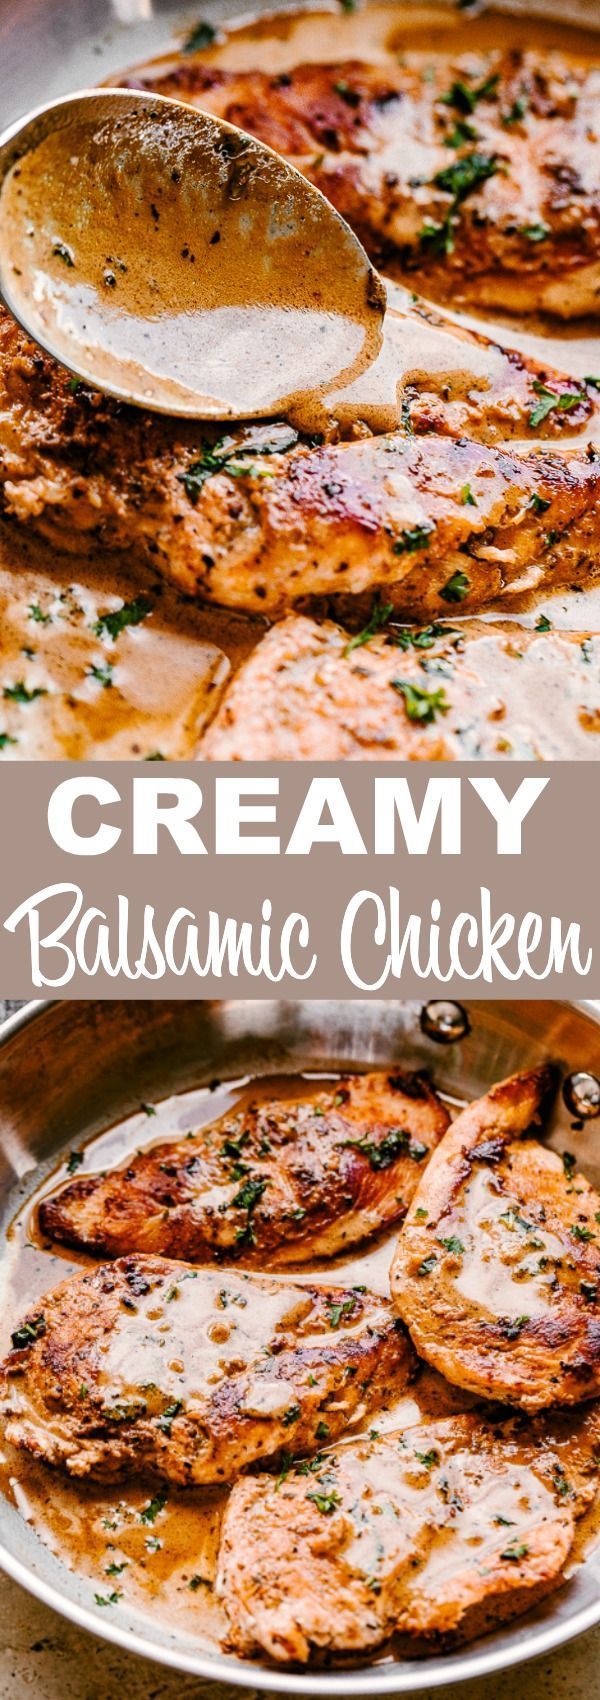 Juicy Skillet Balsamic Chicken Breasts | Easy Weeknight Recipes -   25 dinner recipes for family main dishes chicken breasts ideas